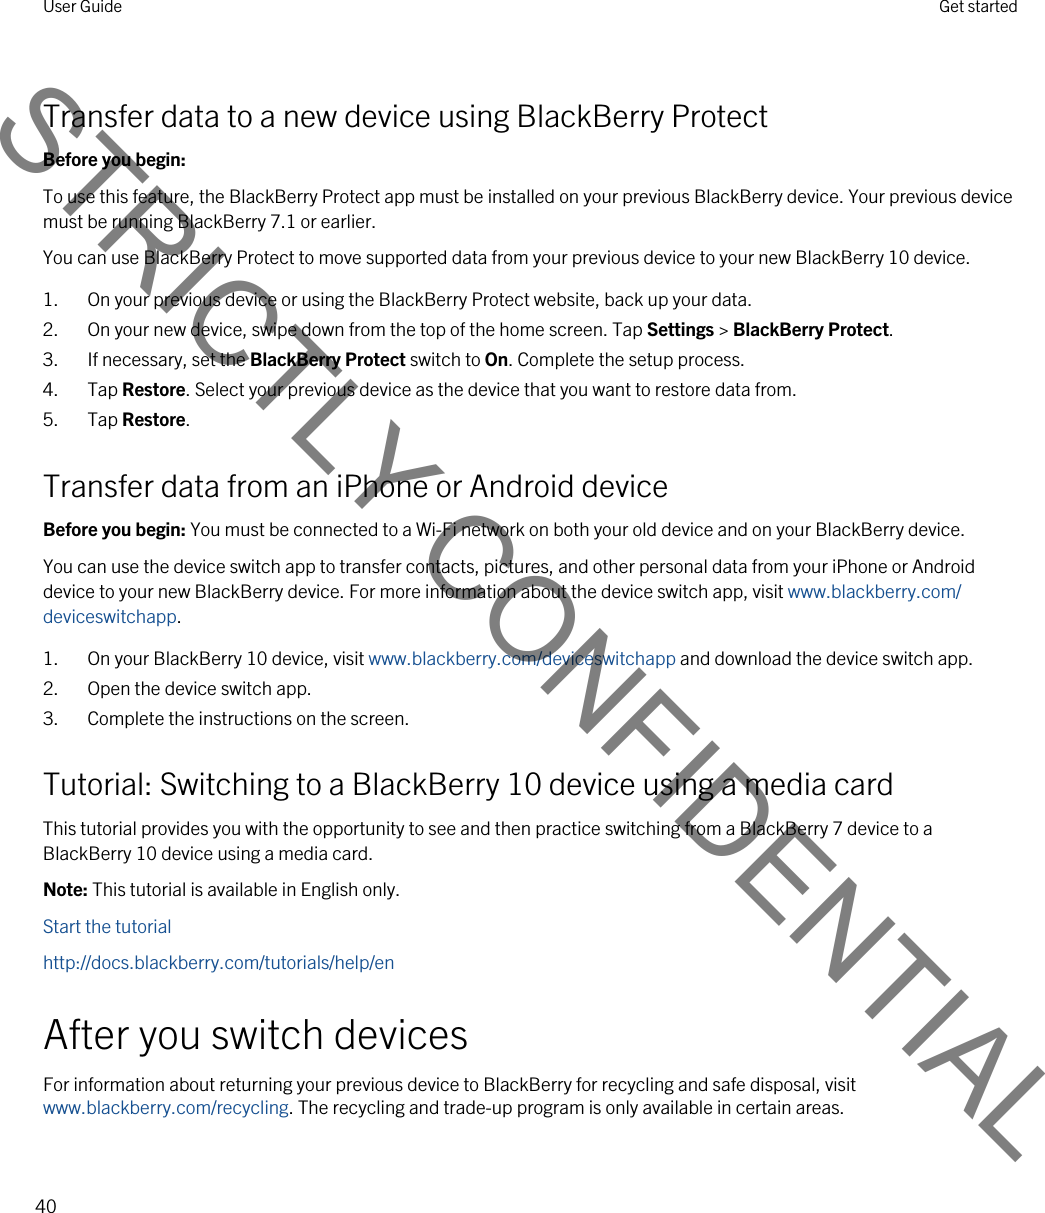 Transfer data to a new device using BlackBerry ProtectBefore you begin: To use this feature, the BlackBerry Protect app must be installed on your previous BlackBerry device. Your previous device must be running BlackBerry 7.1 or earlier.You can use BlackBerry Protect to move supported data from your previous device to your new BlackBerry 10 device.1. On your previous device or using the BlackBerry Protect website, back up your data.2. On your new device, swipe down from the top of the home screen. Tap Settings &gt; BlackBerry Protect.3. If necessary, set the BlackBerry Protect switch to On. Complete the setup process.4. Tap Restore. Select your previous device as the device that you want to restore data from.5. Tap Restore.Transfer data from an iPhone or Android deviceBefore you begin: You must be connected to a Wi-Fi network on both your old device and on your BlackBerry device.You can use the device switch app to transfer contacts, pictures, and other personal data from your iPhone or Android device to your new BlackBerry device. For more information about the device switch app, visit www.blackberry.com/deviceswitchapp.1. On your BlackBerry 10 device, visit www.blackberry.com/deviceswitchapp and download the device switch app.2. Open the device switch app.3. Complete the instructions on the screen.Tutorial: Switching to a BlackBerry 10 device using a media cardThis tutorial provides you with the opportunity to see and then practice switching from a BlackBerry 7 device to a BlackBerry 10 device using a media card.Note: This tutorial is available in English only.Start the tutorialhttp://docs.blackberry.com/tutorials/help/enAfter you switch devicesFor information about returning your previous device to BlackBerry for recycling and safe disposal, visit www.blackberry.com/recycling. The recycling and trade-up program is only available in certain areas.User Guide Get started40STRICTLY CONFIDENTIAL